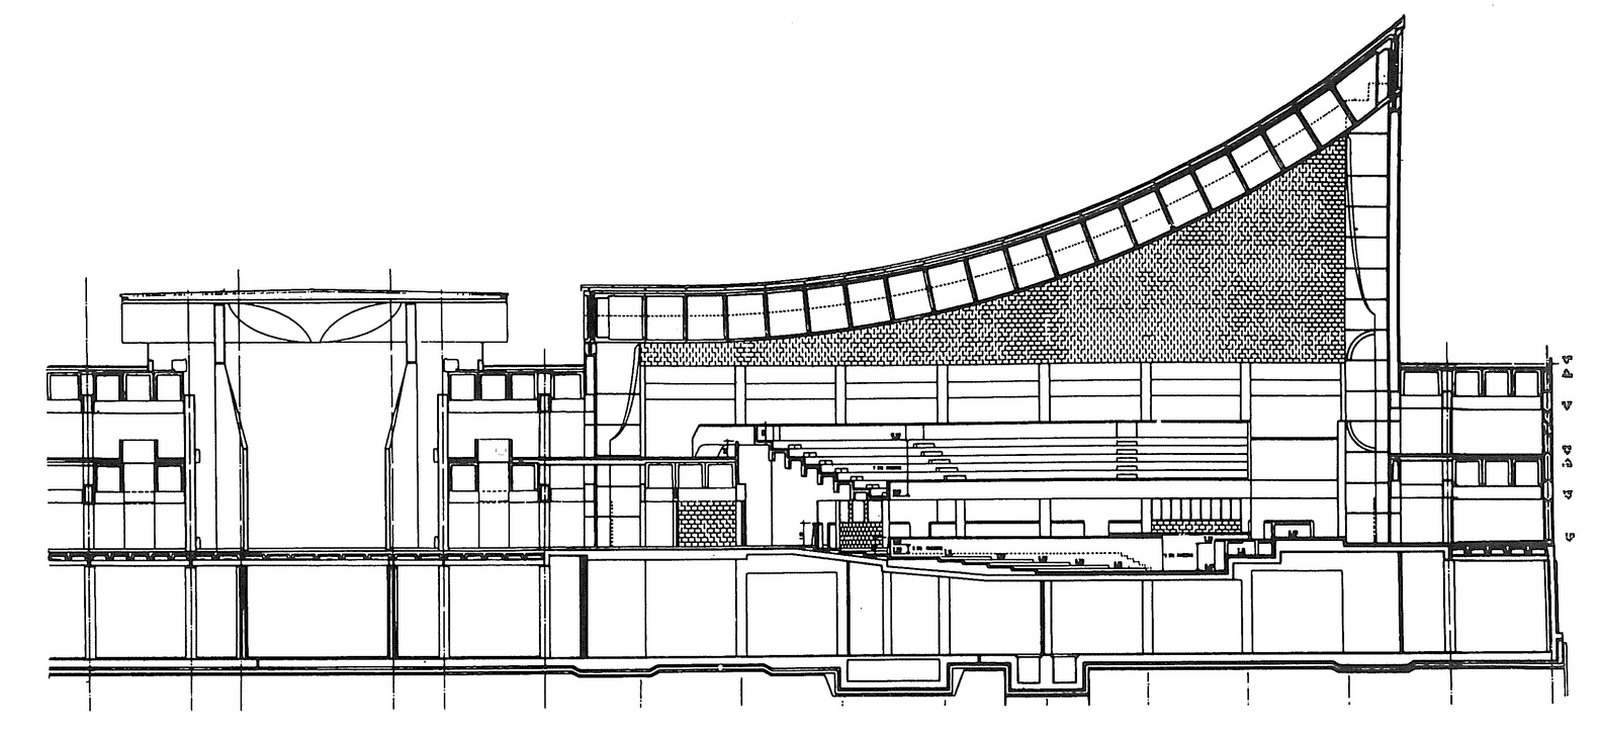 Kuwait National Assembly Building by Jørn Utzon: Architecture inspired from Bazaars - Sheet9